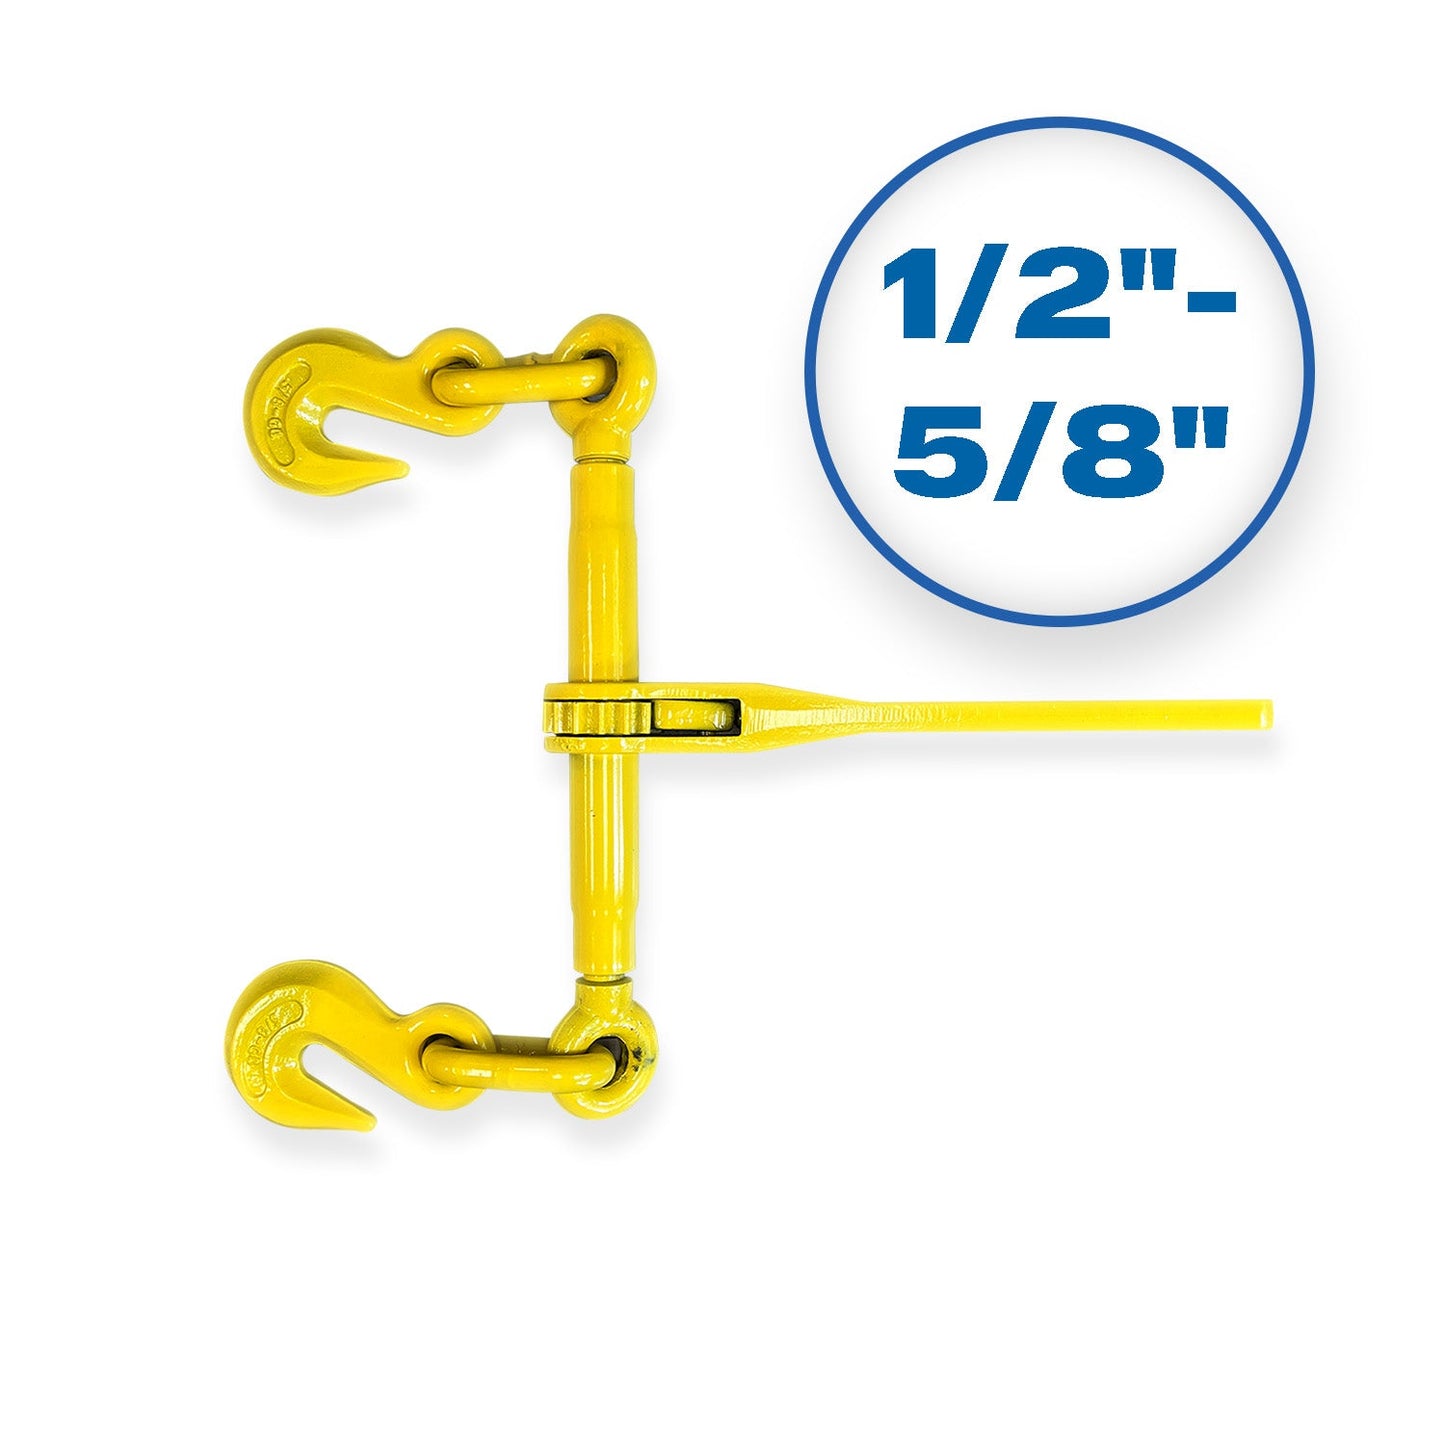 Ratchet Chain Binder for 1/2"-5/8" Chains - 13,000 lbs Capacity